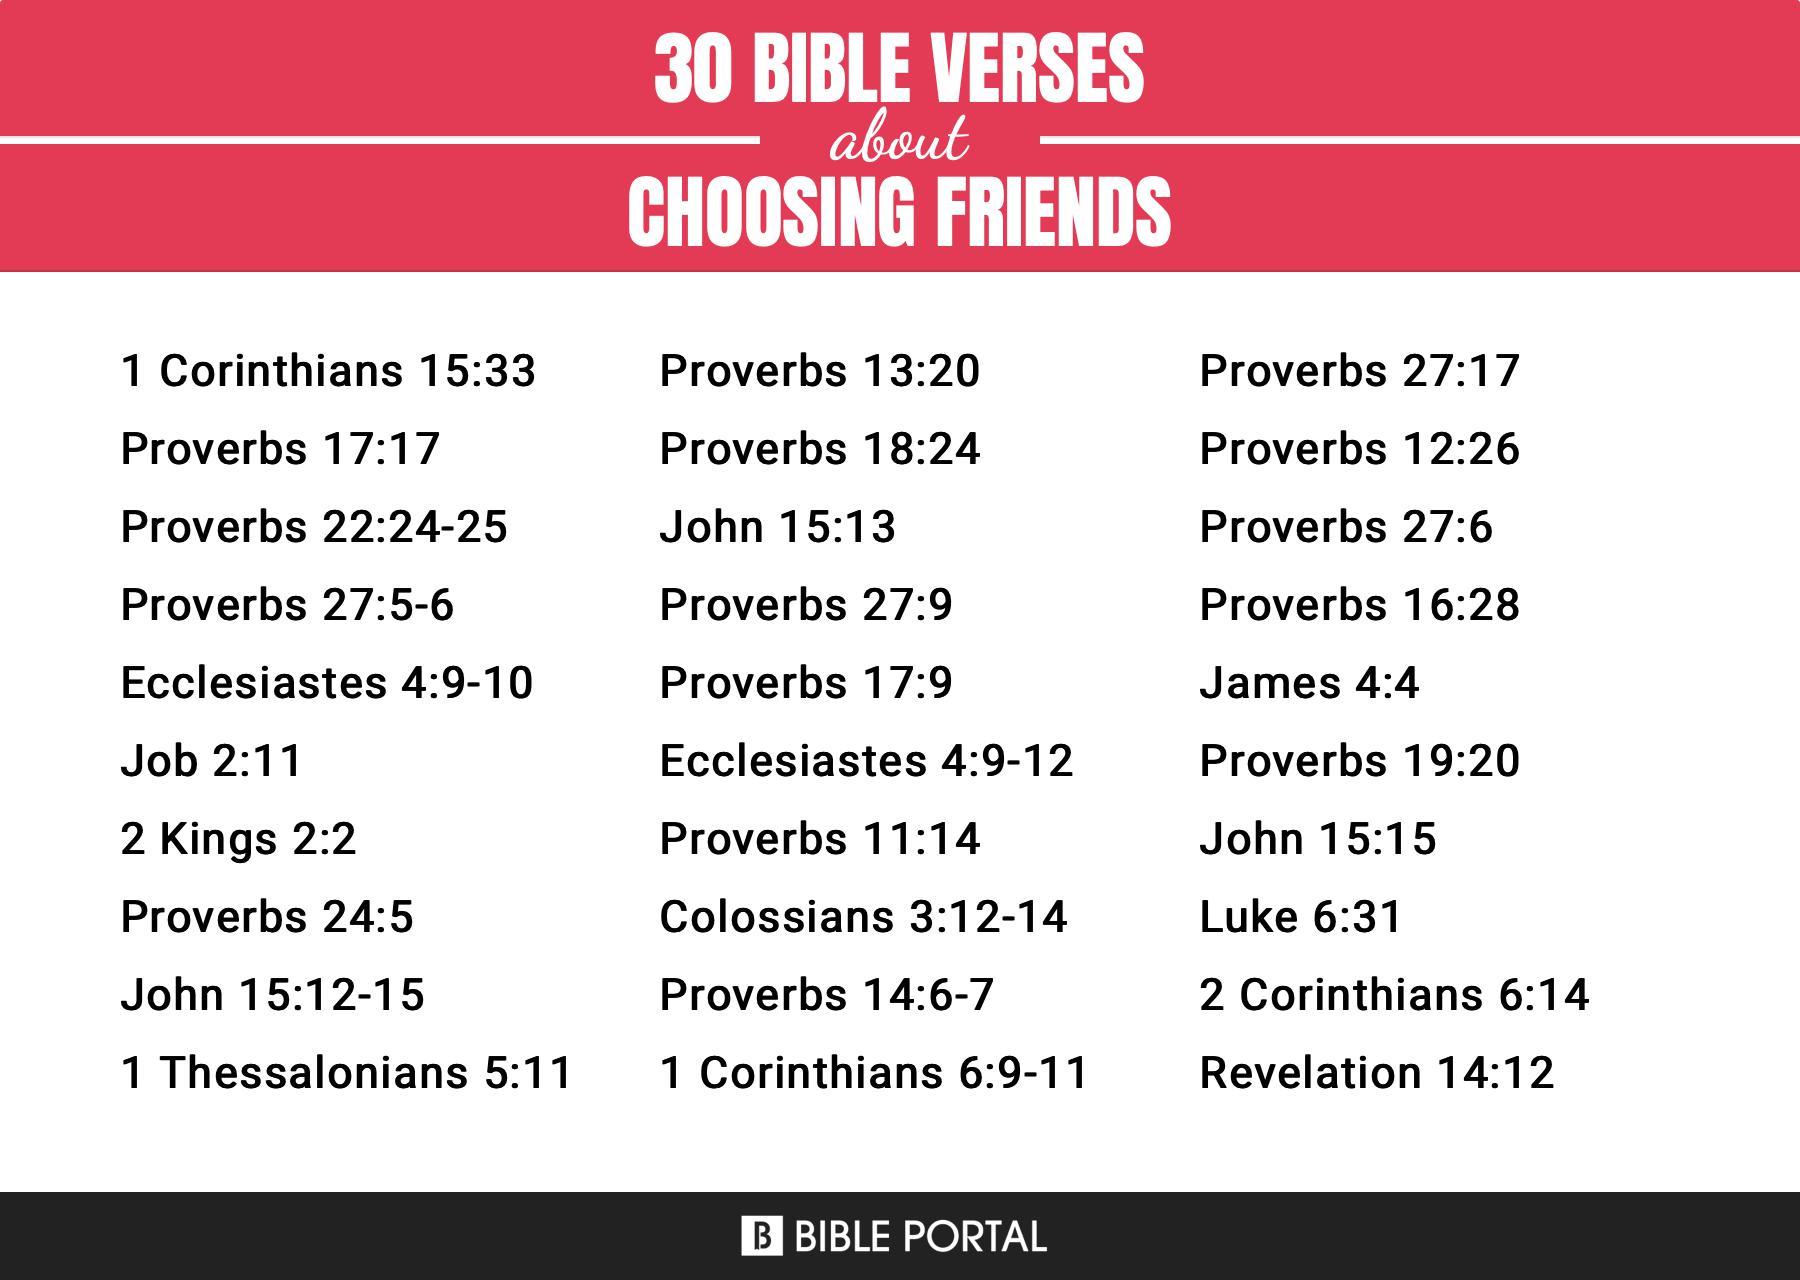 What Does the Bible Say about Choosing Friends?